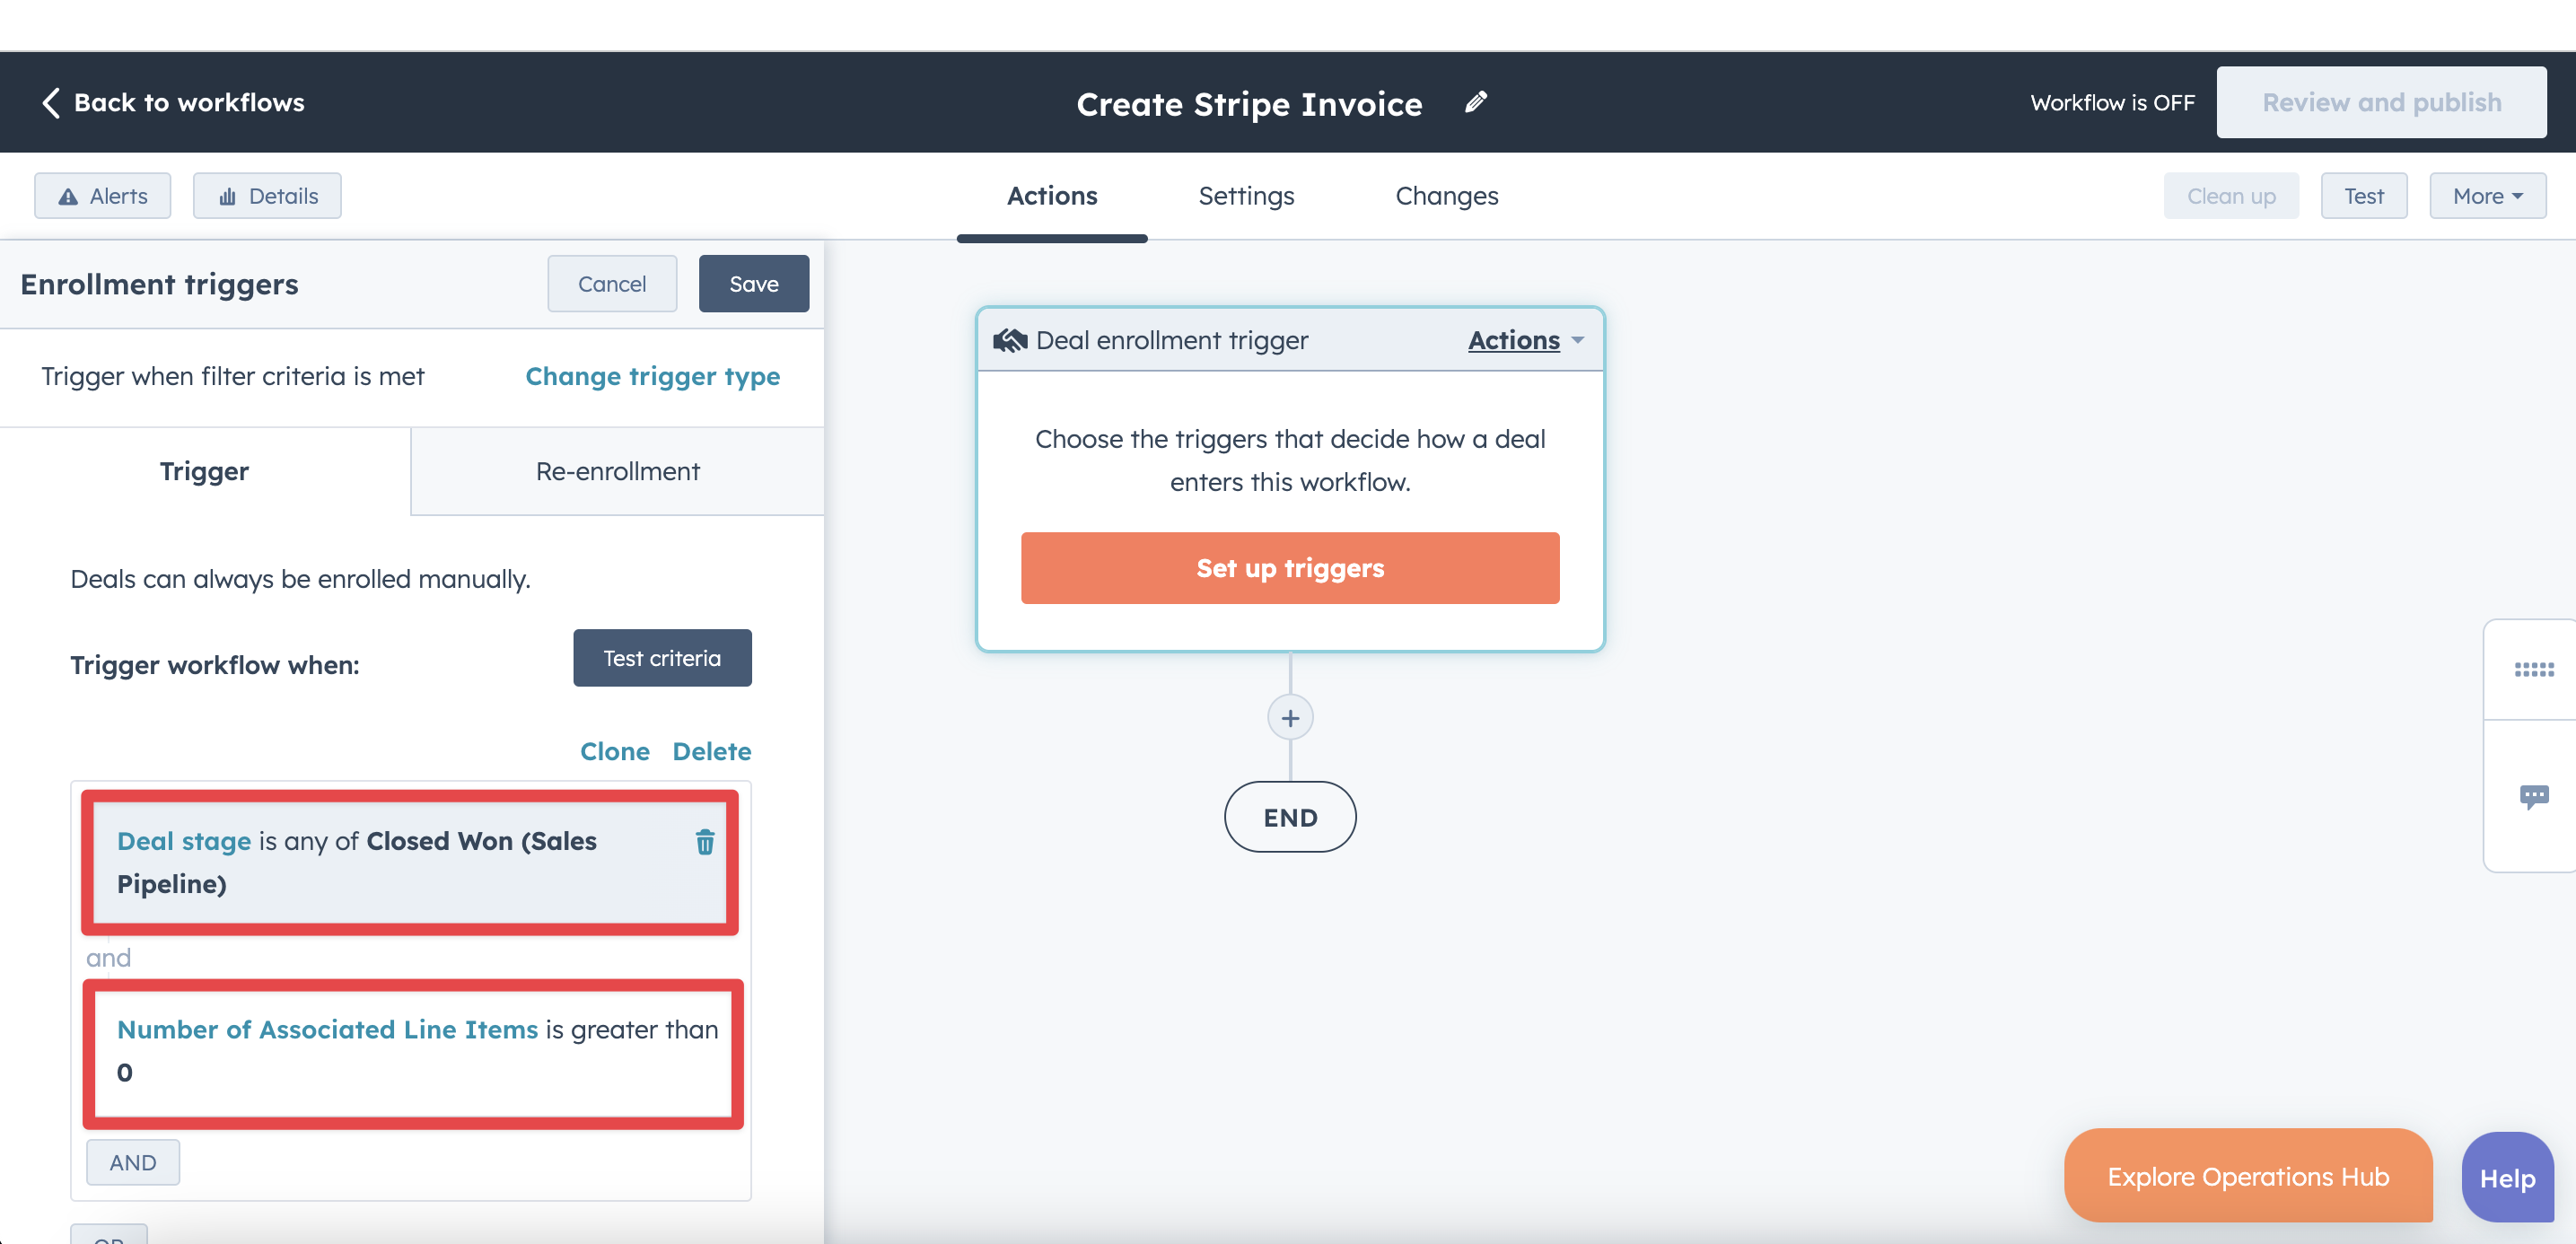 How to automatically create a stripe invoice in HubSpot